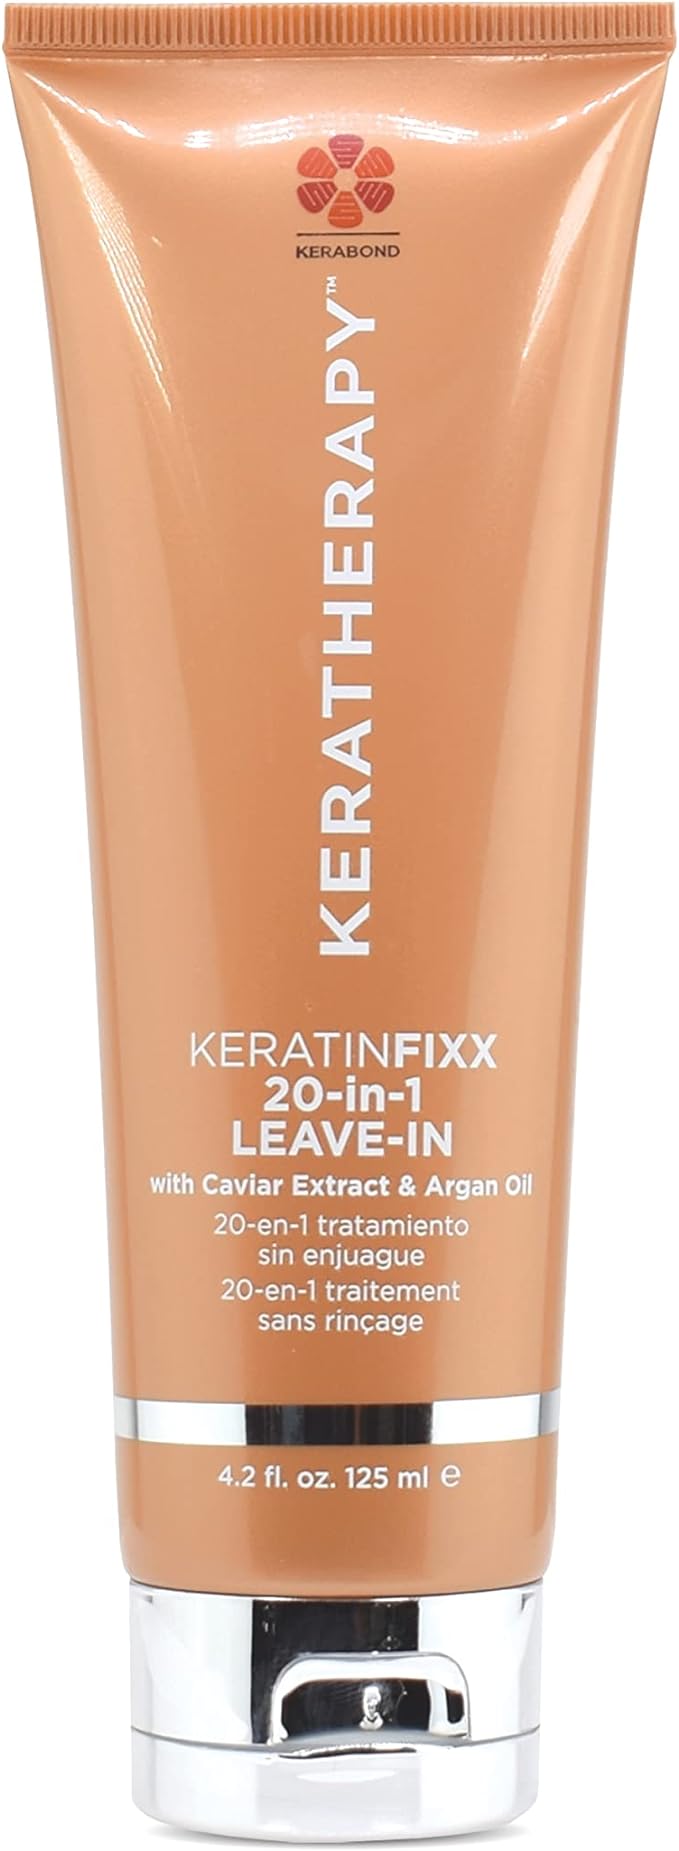 KERATHERAPY Keratin Infused KeratinFIXX 20-in-1 Leave-in Conditioning Treatment, 4.2 fl. oz, 125 ml